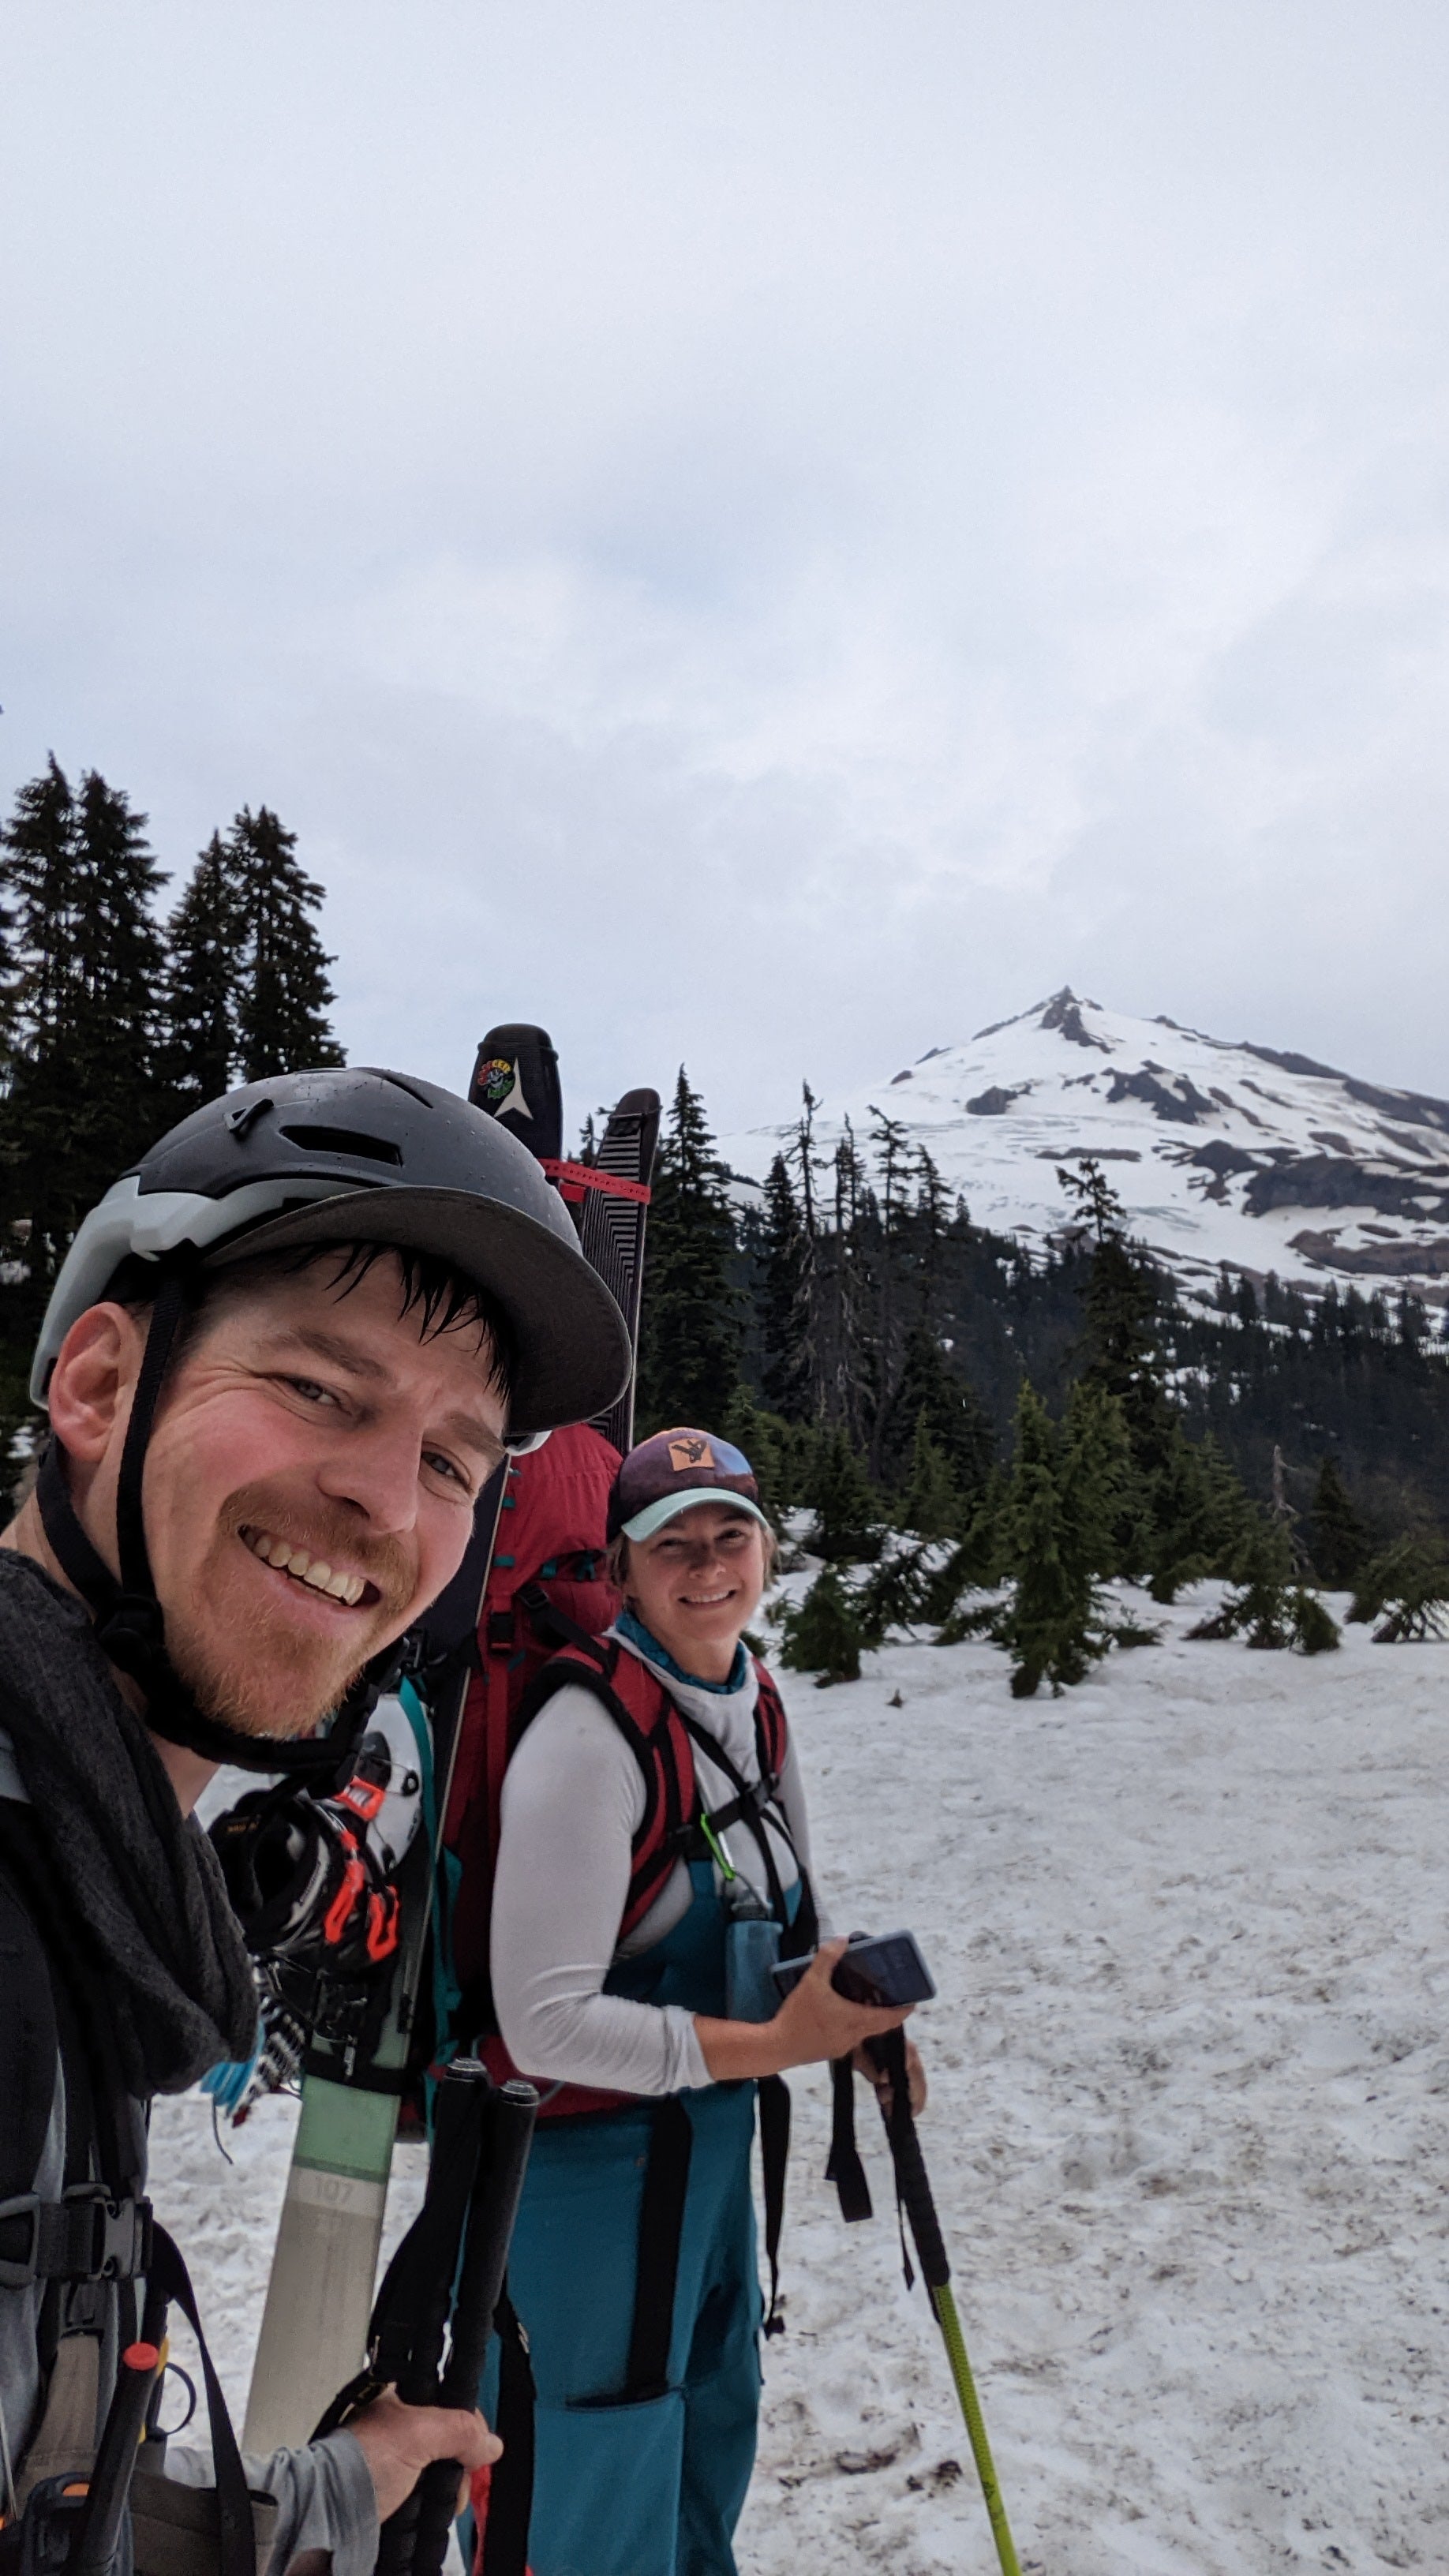 two people with skis on snowy mountain